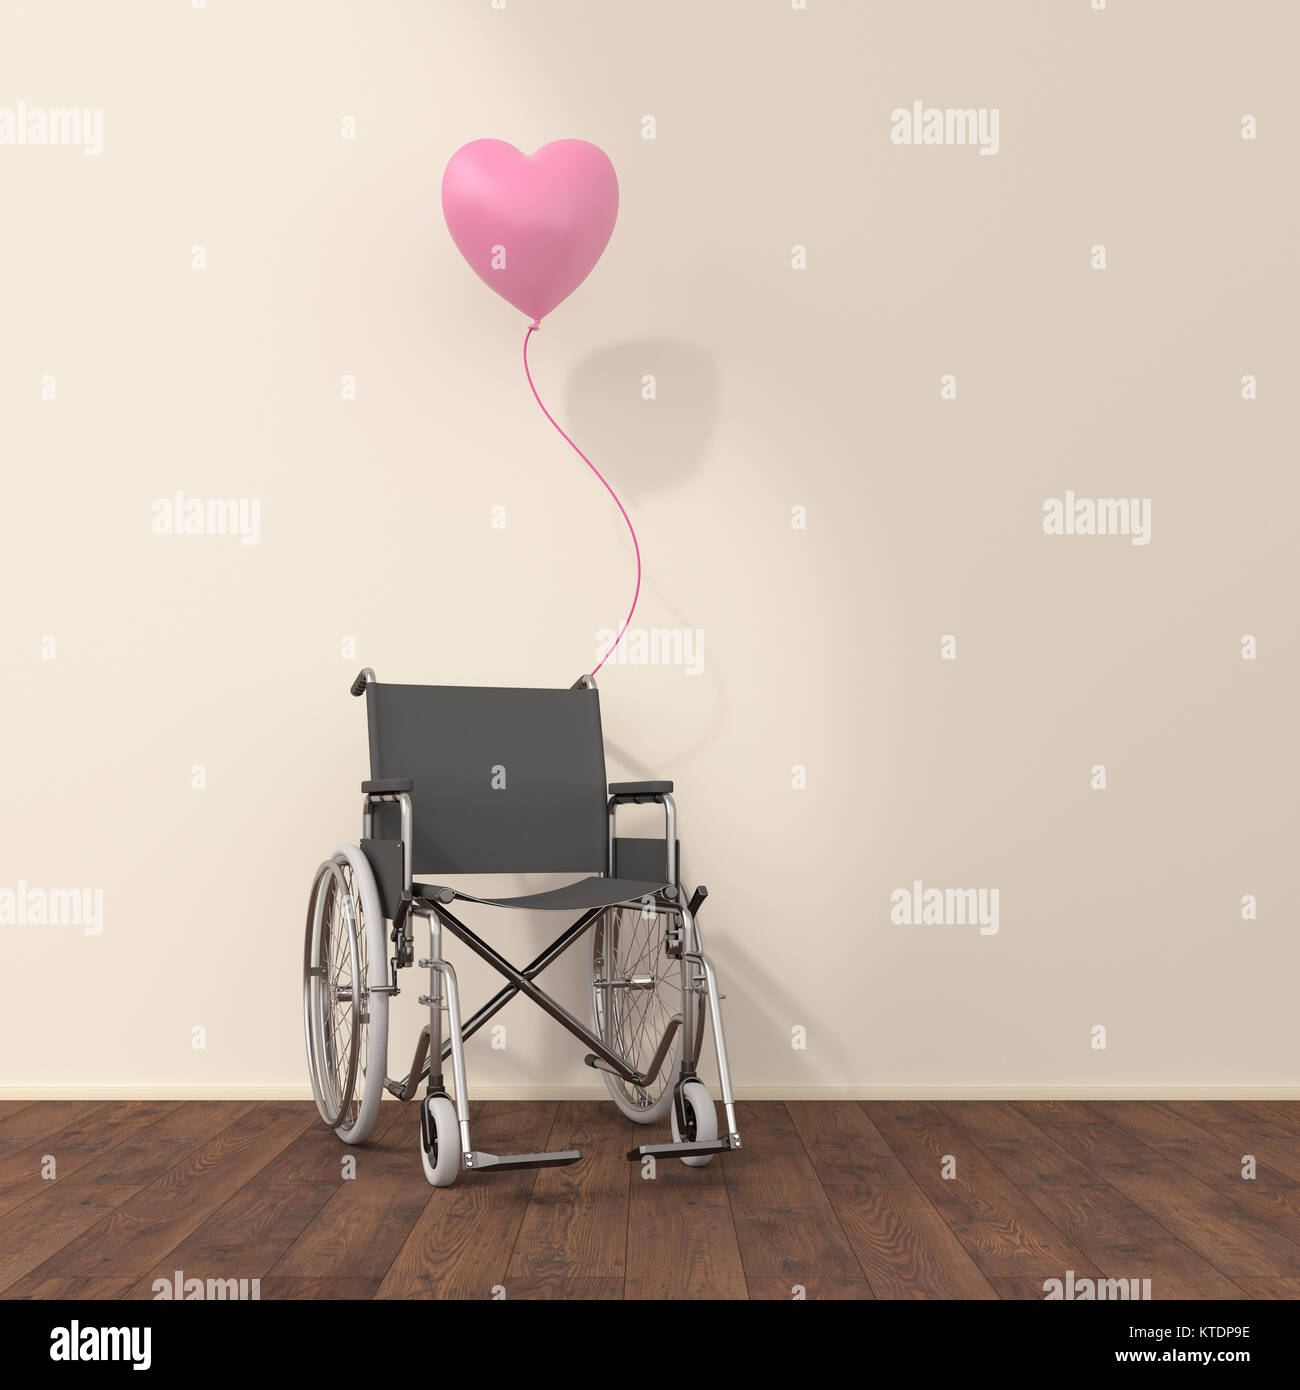 Wheelchair and pink balloon in a waiting room, 3D rendering Stock Photo